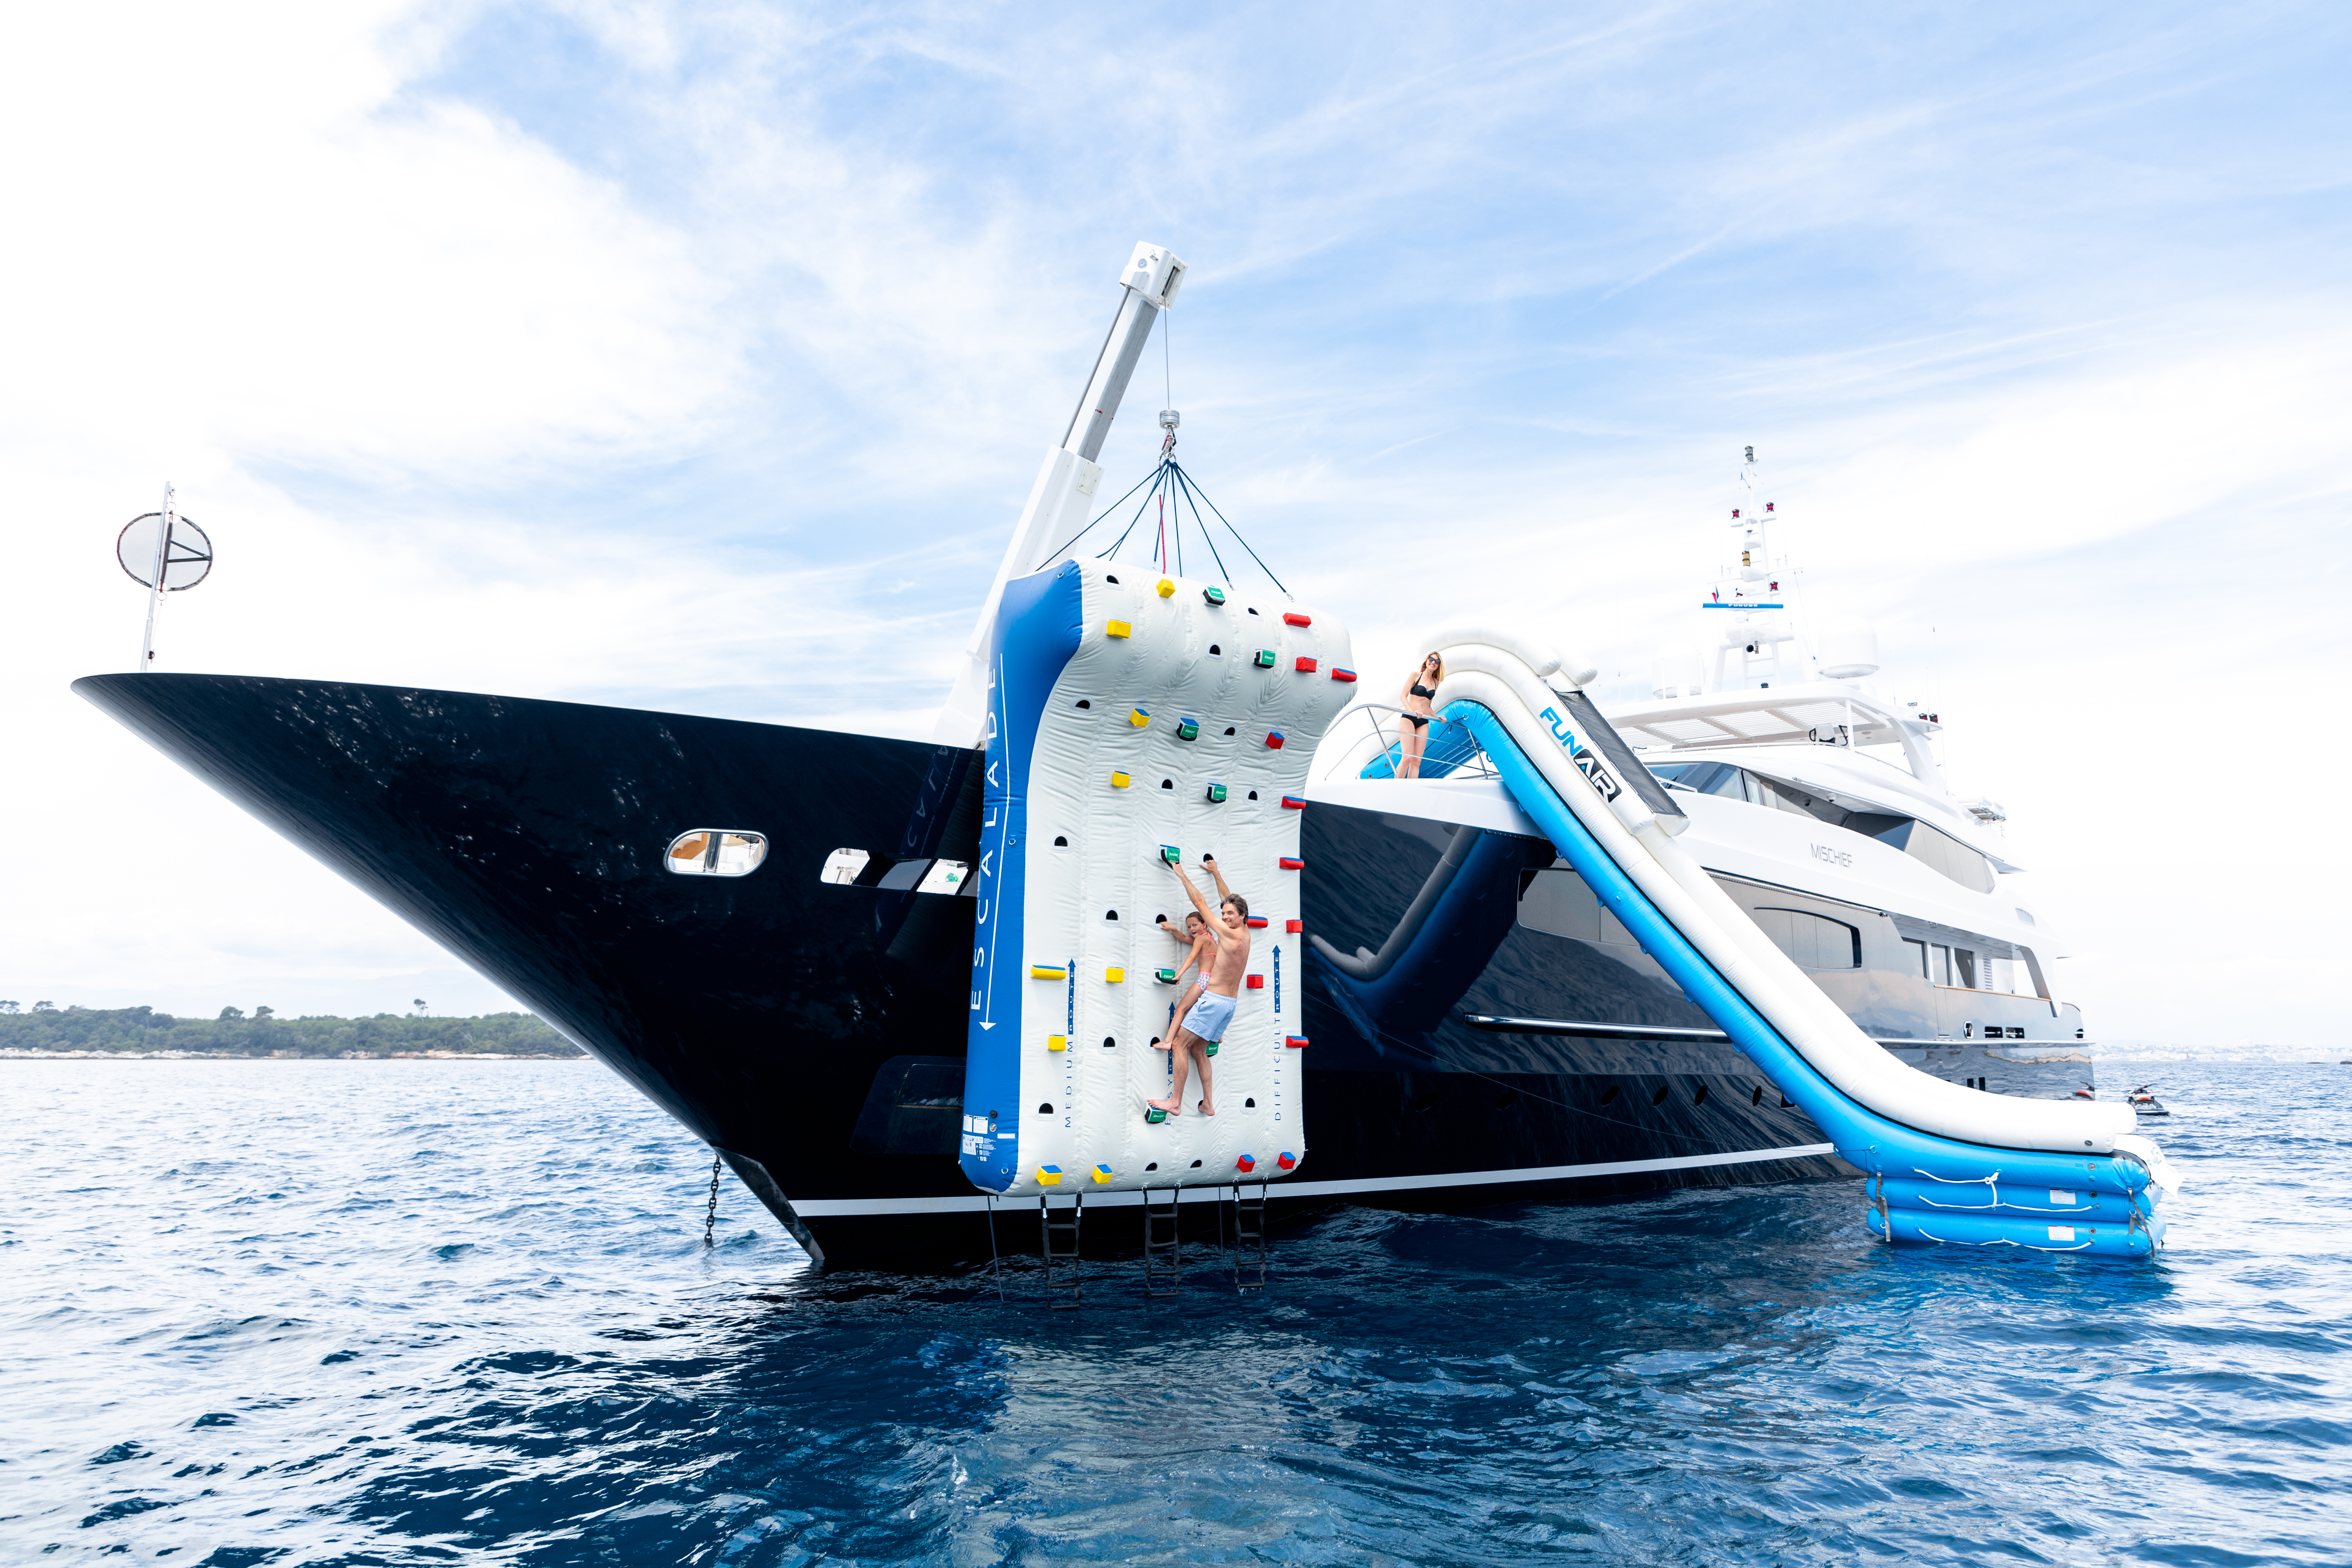 Super yacht mischief with water toys